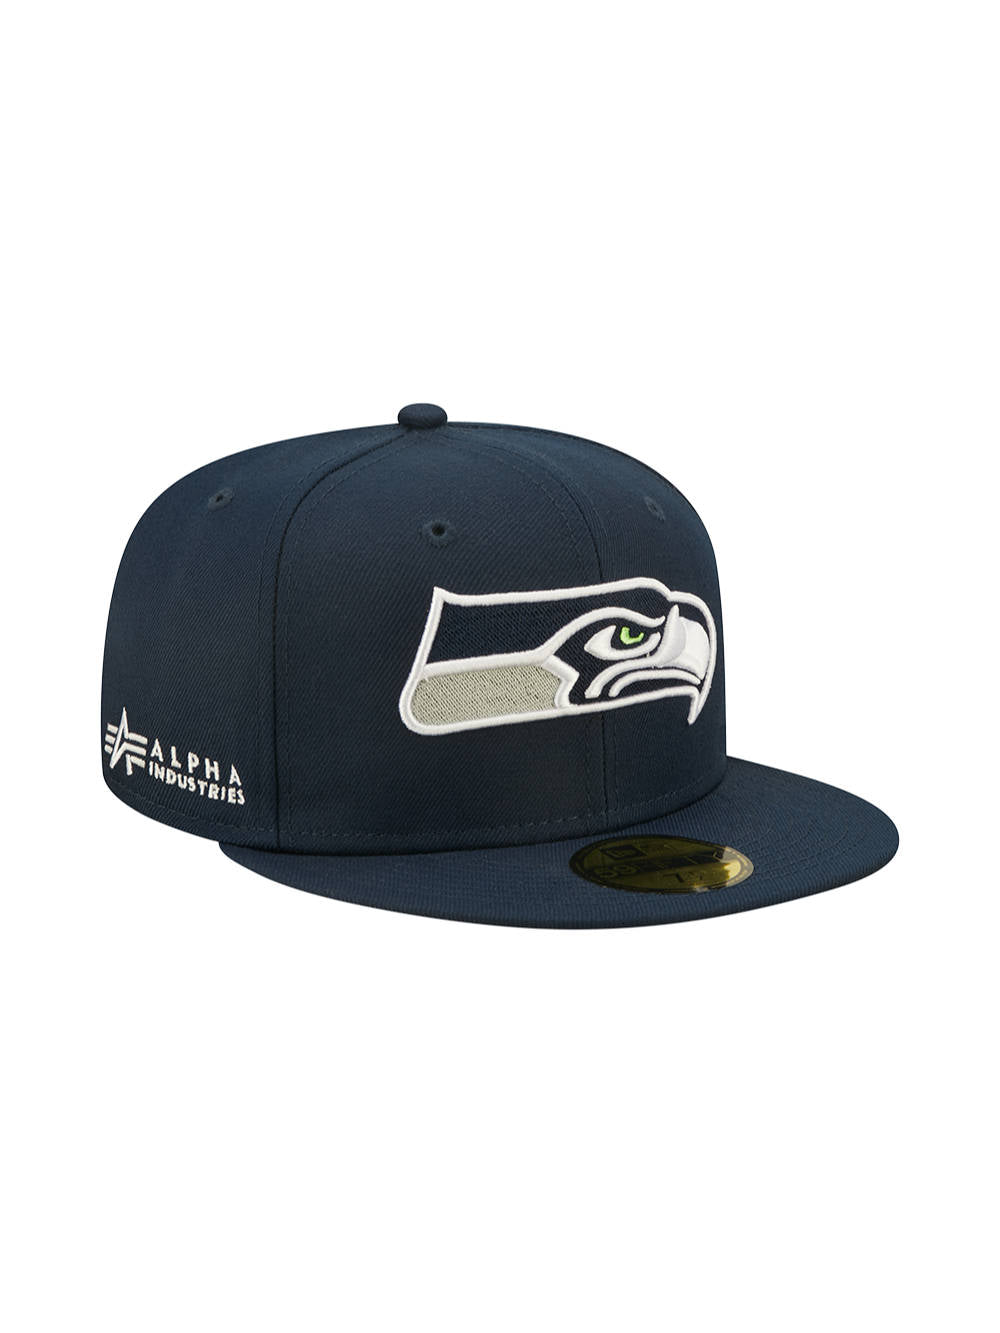 SEATTLE SEAHAWKS X ALPHA X NEW ERA 59FIFTY FITTED CAP ACCESSORY Alpha Industries 